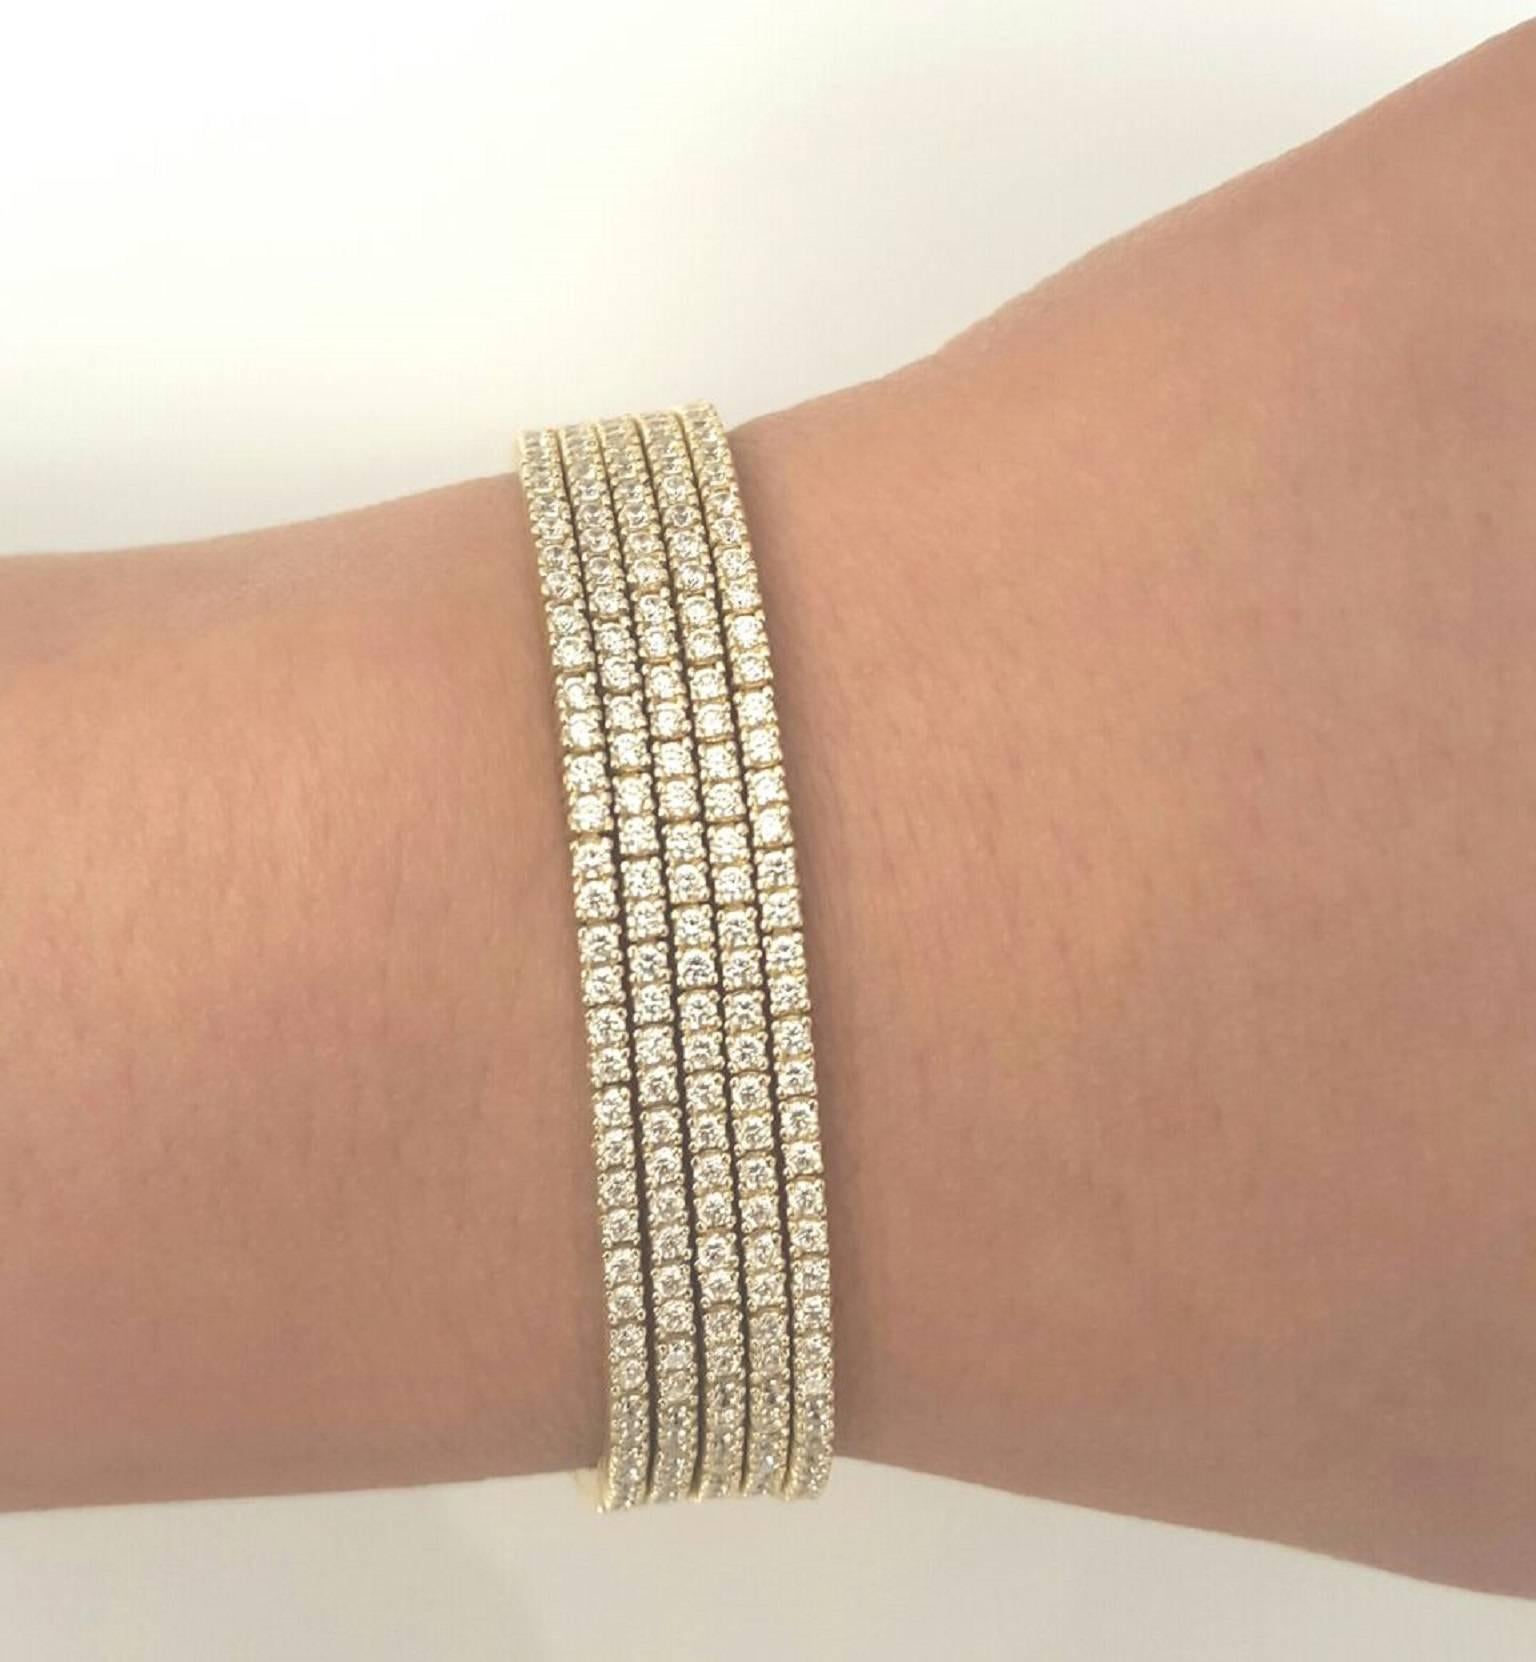 Approx. 8.00 carats total weight diamonds.The finest conflict free diamonds set in our unique endless diamond bracelet. (Standard length is 7" however we can alter this bracelet to any size wrist). Can be ordered in 14k or 18k white/yellow/rose